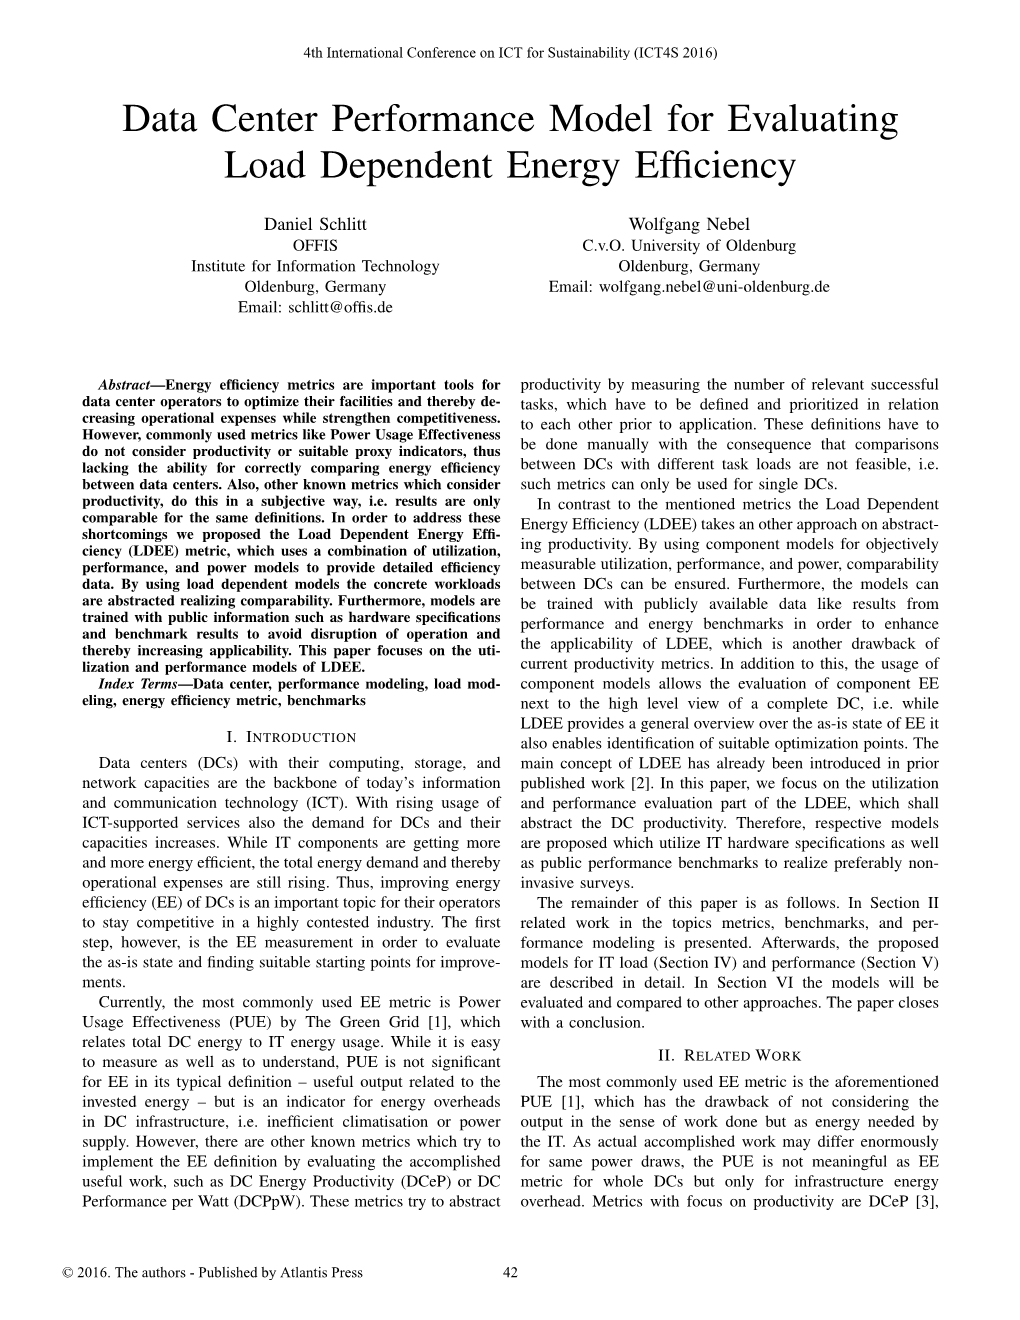 Data Center Performance Model for Evaluating Load Dependent Energy Efﬁciency